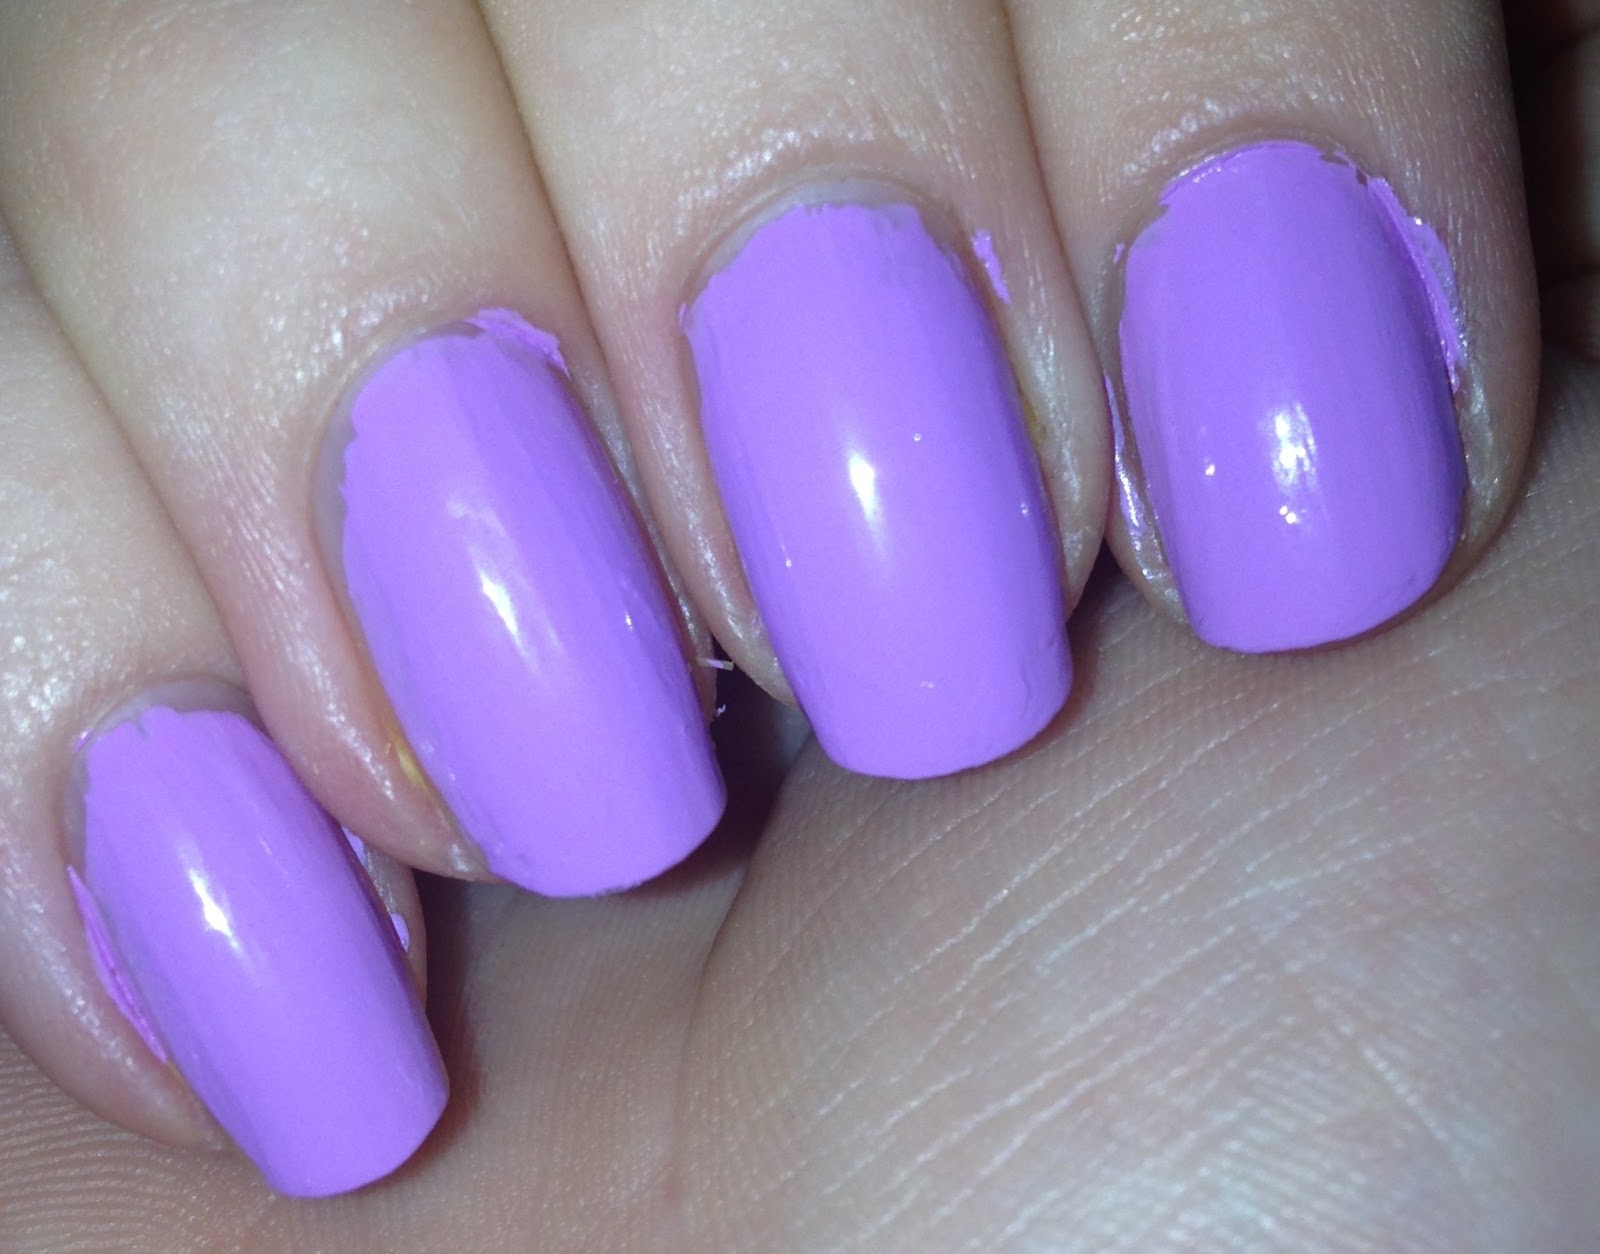 9. Butter London Nail Lacquer in "Molly Coddled" - wide 4